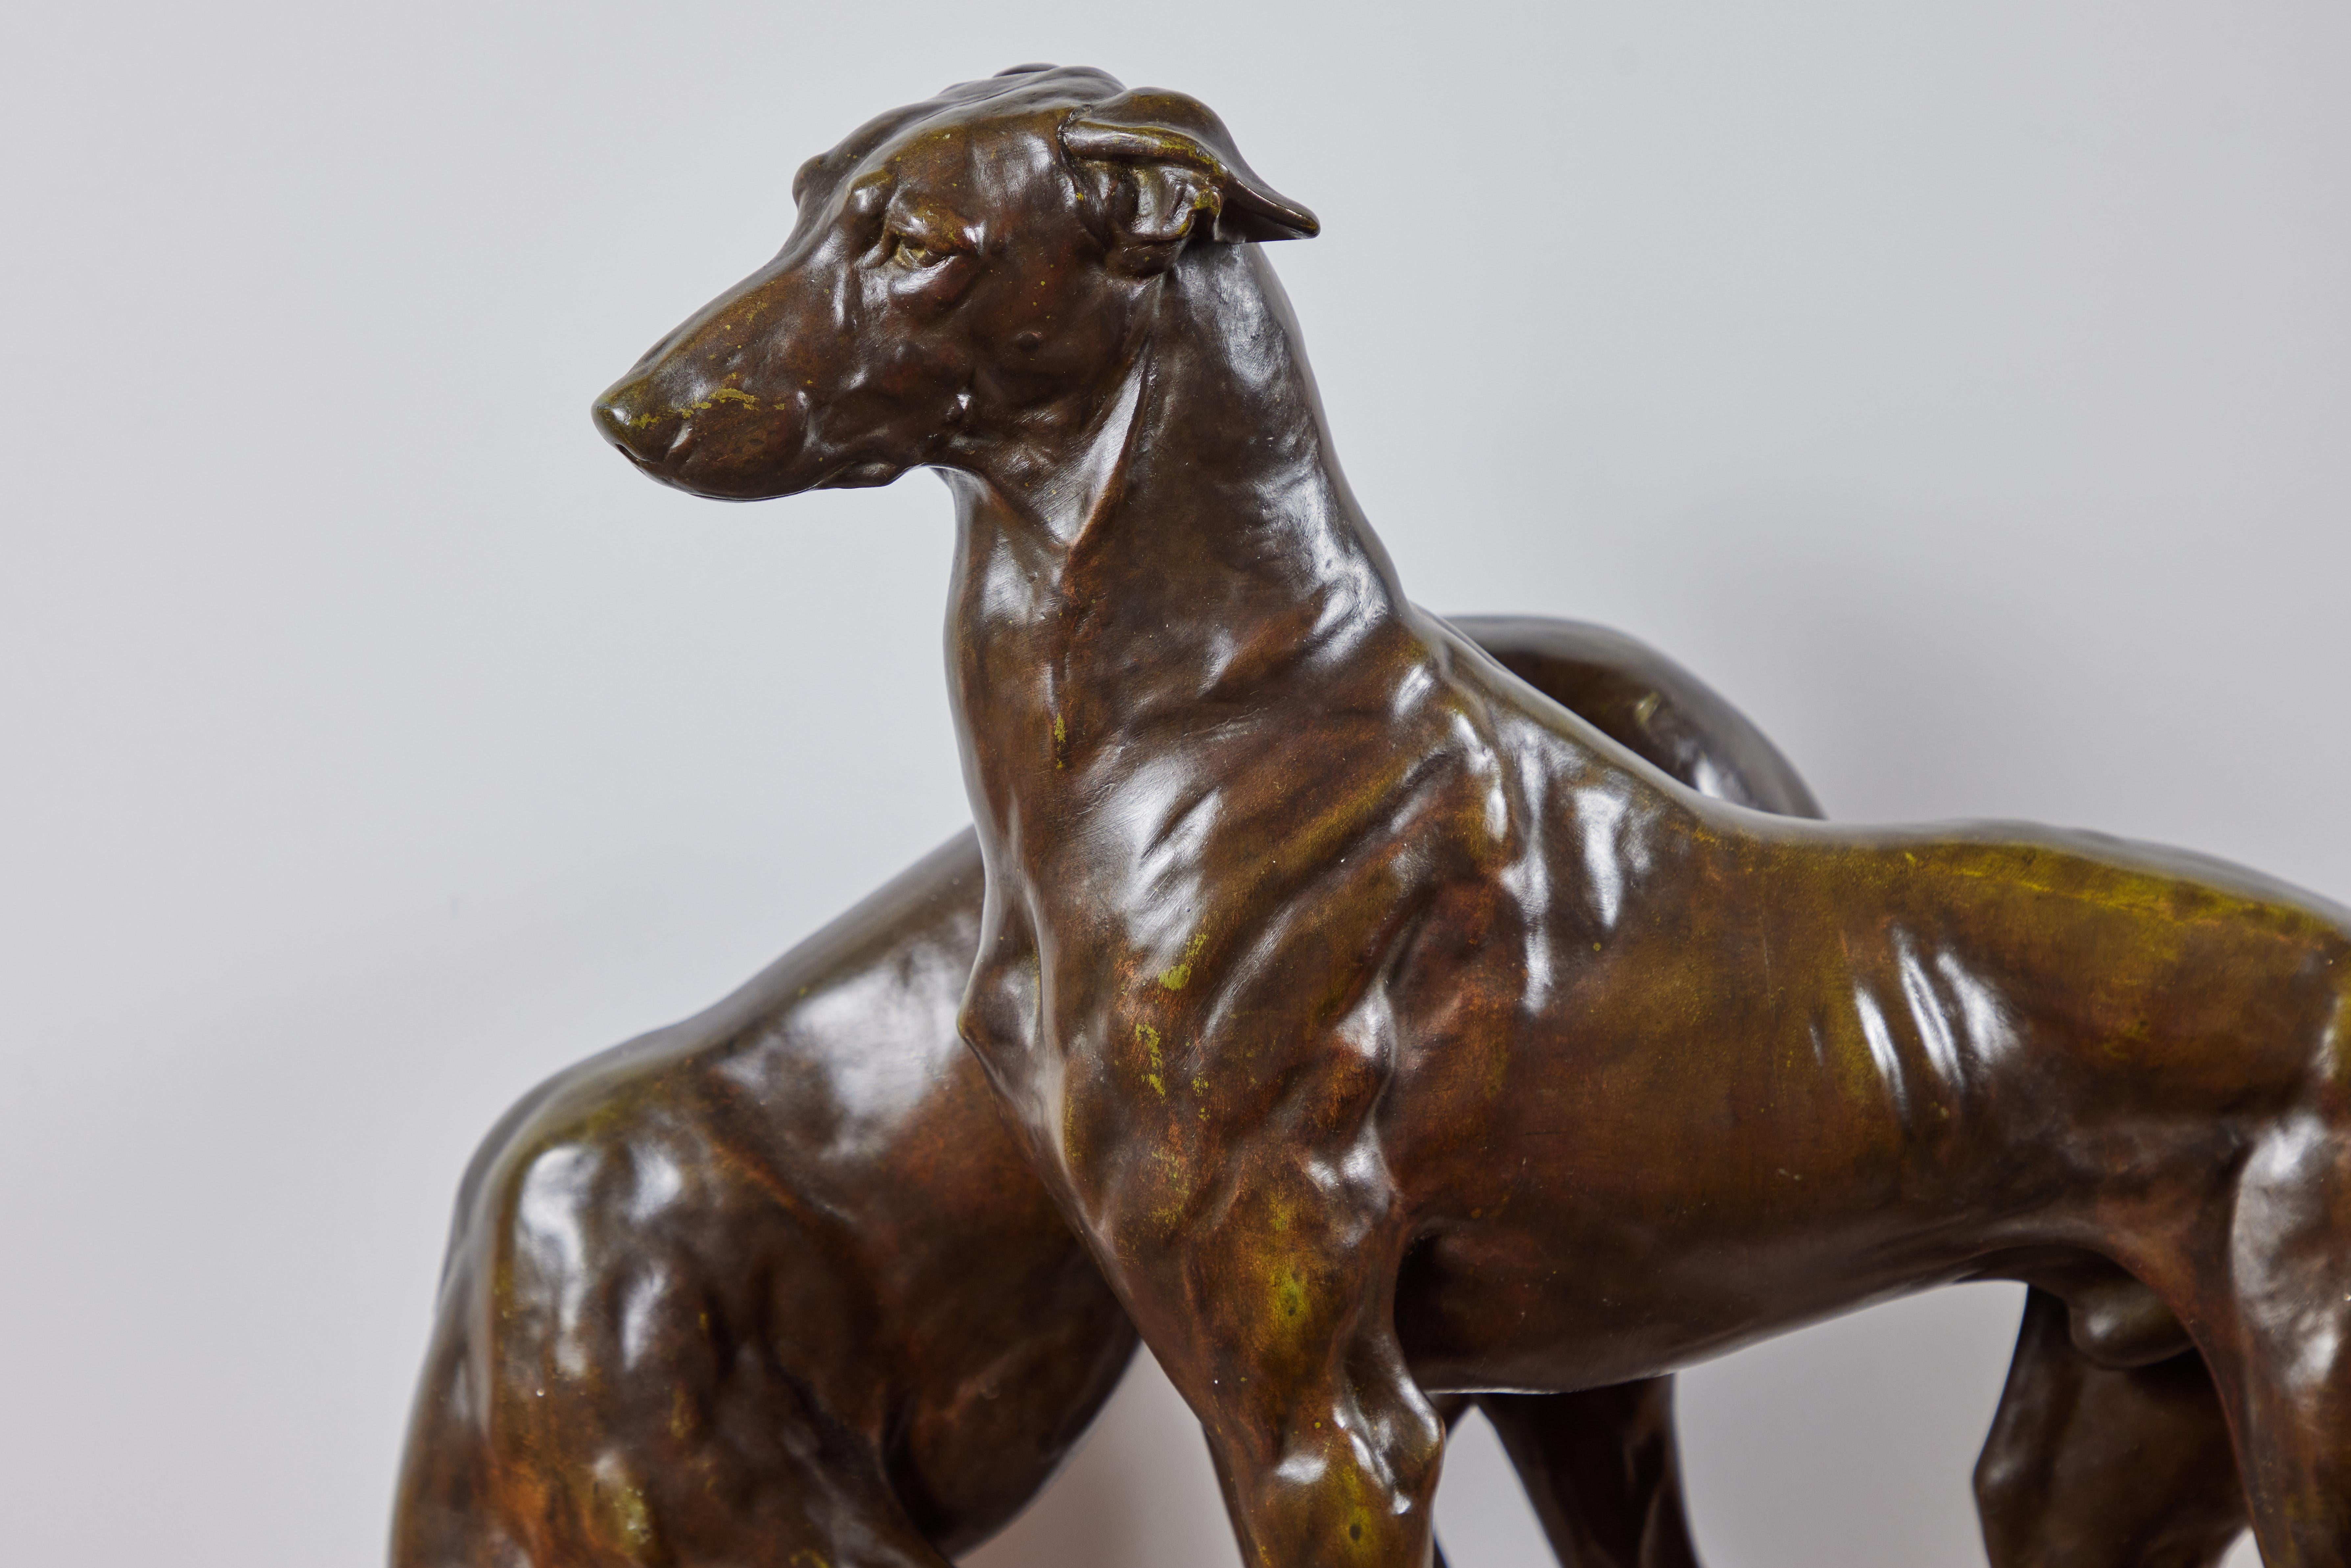 An elegant pair of 1920's, patinated, bronze hounds initially conceived and created by master sculptor, J.E. Masson (1871-1932). This edition cast at the renowned Le Verrier art metal foundry in Paris. Mounted on a sandstone base and inset with a